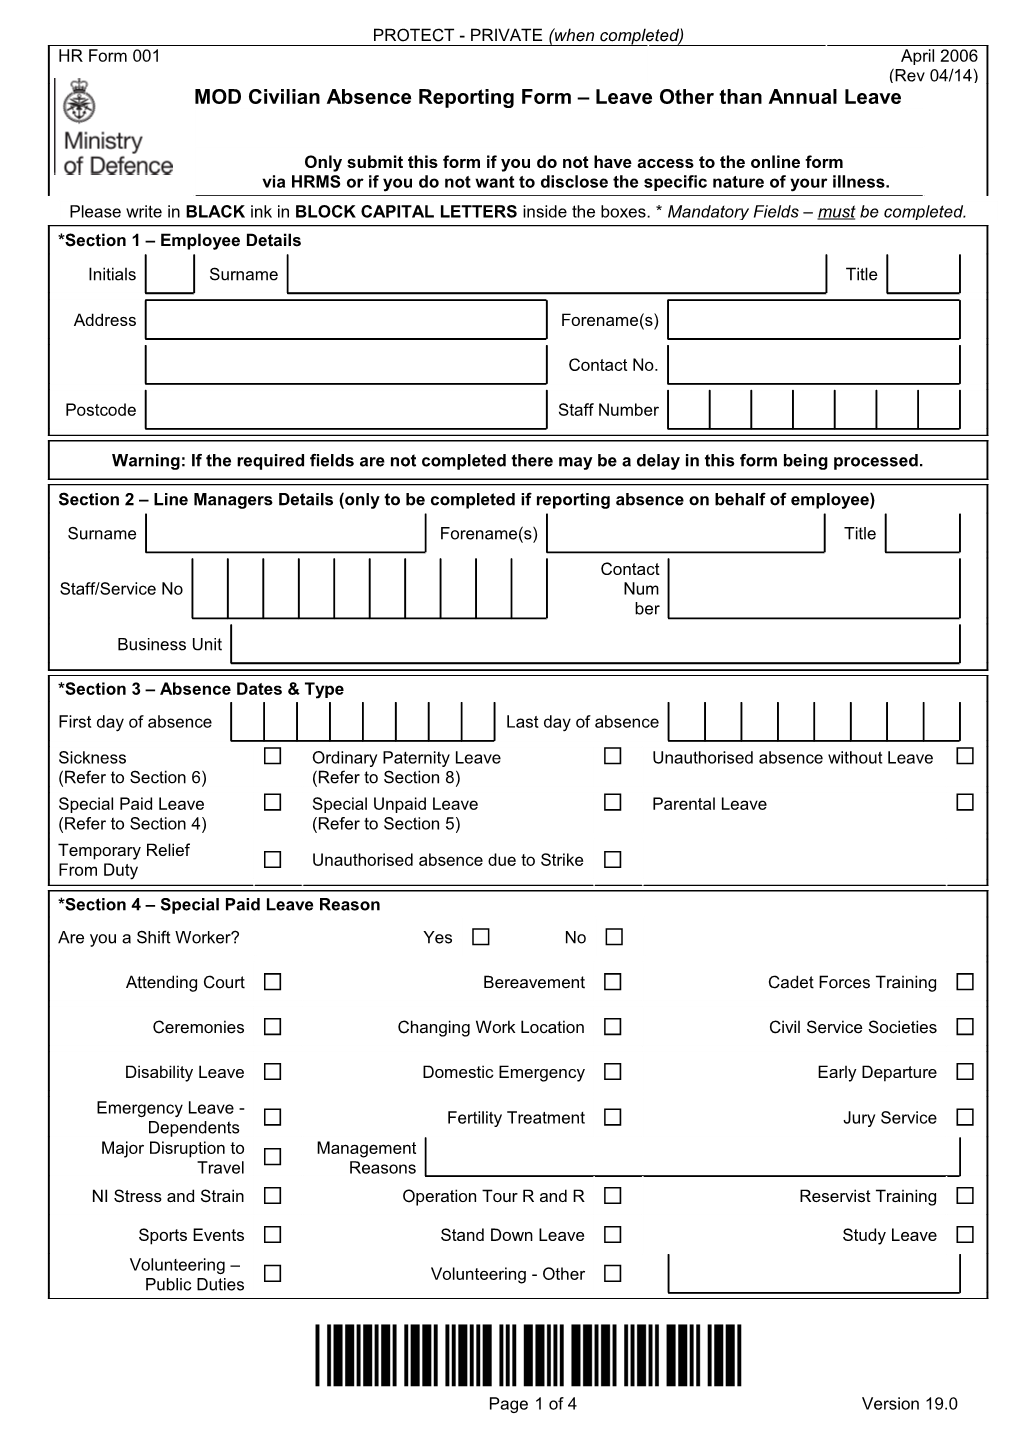 HR Form 001: MOD Civilian Absence Reporting Form - Leave Other Than Annual Leave